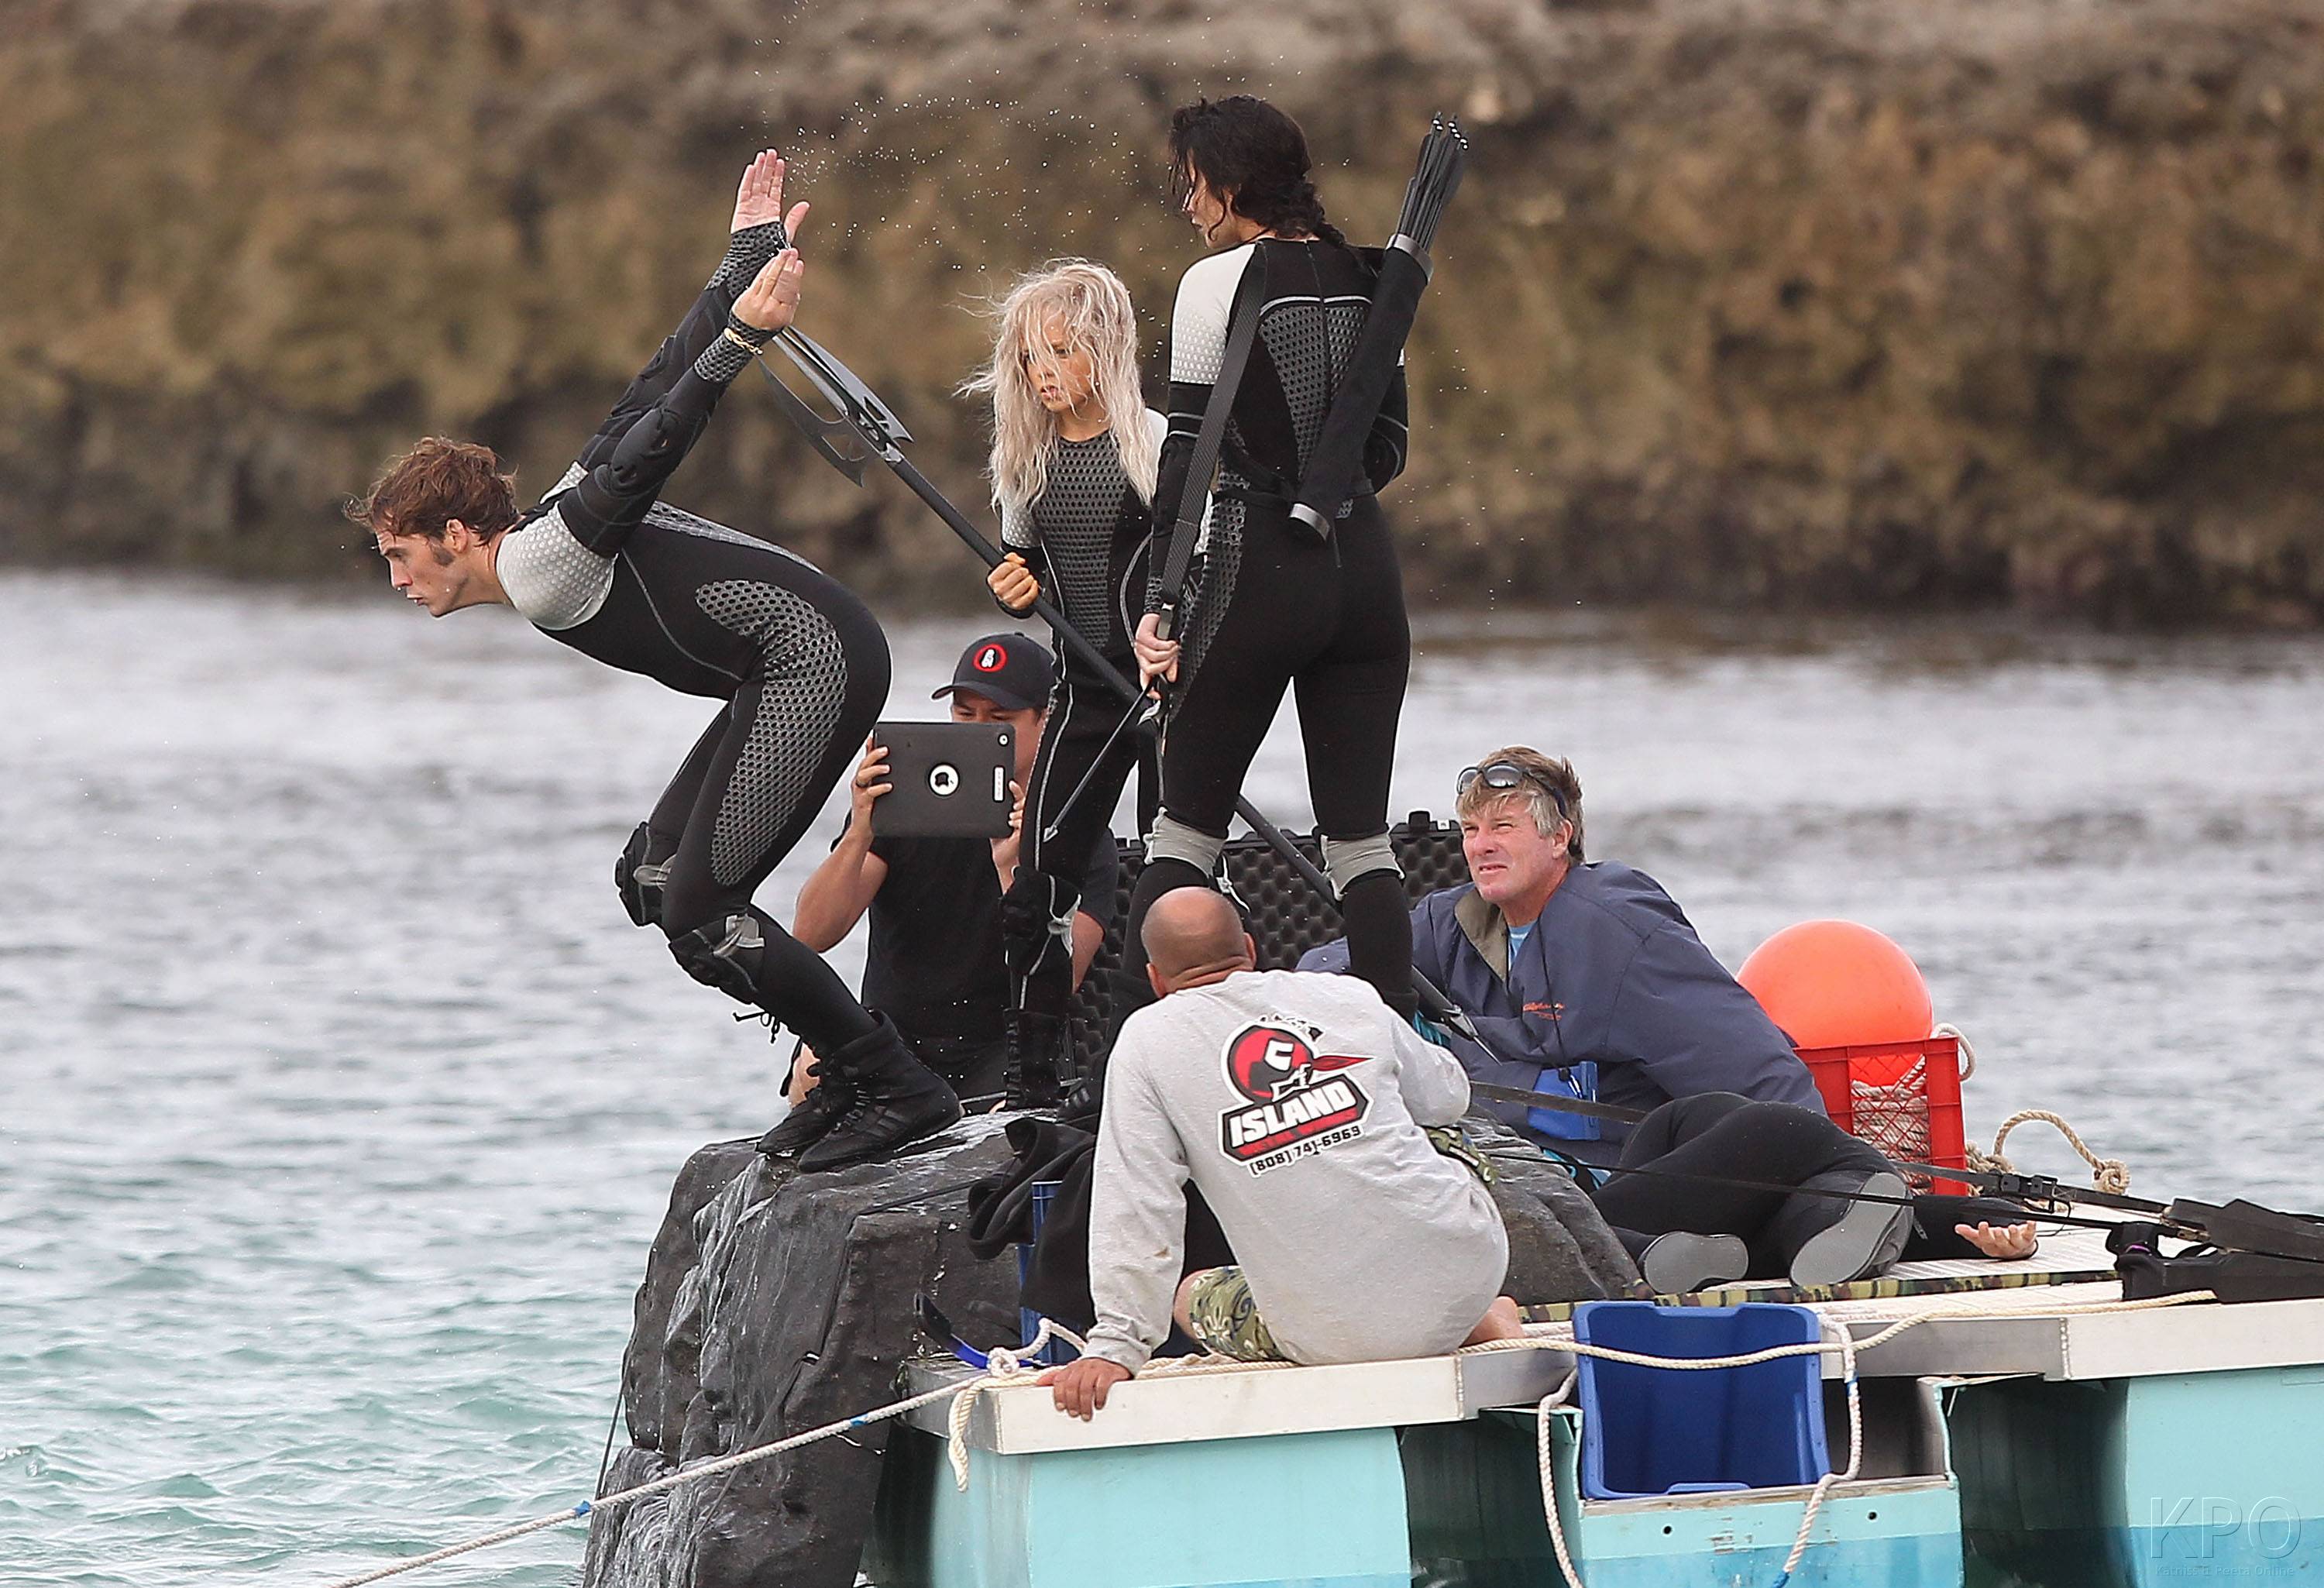 Catching-Fire-shooting-in-Hawaii-the-hunger-games-32877062-3000-2050